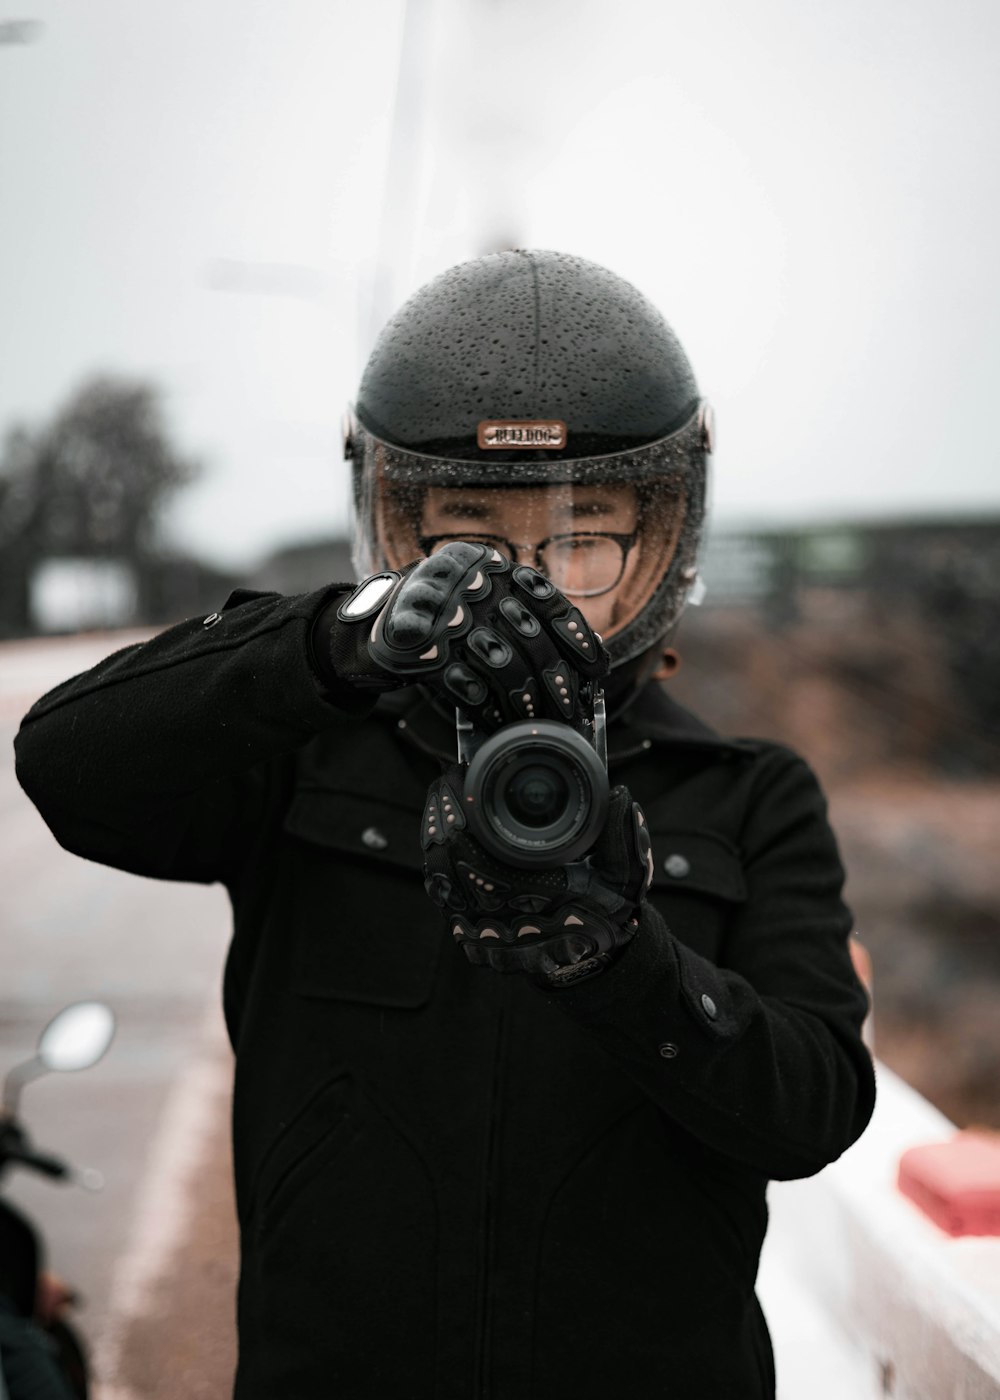 a person wearing a helmet and holding a camera